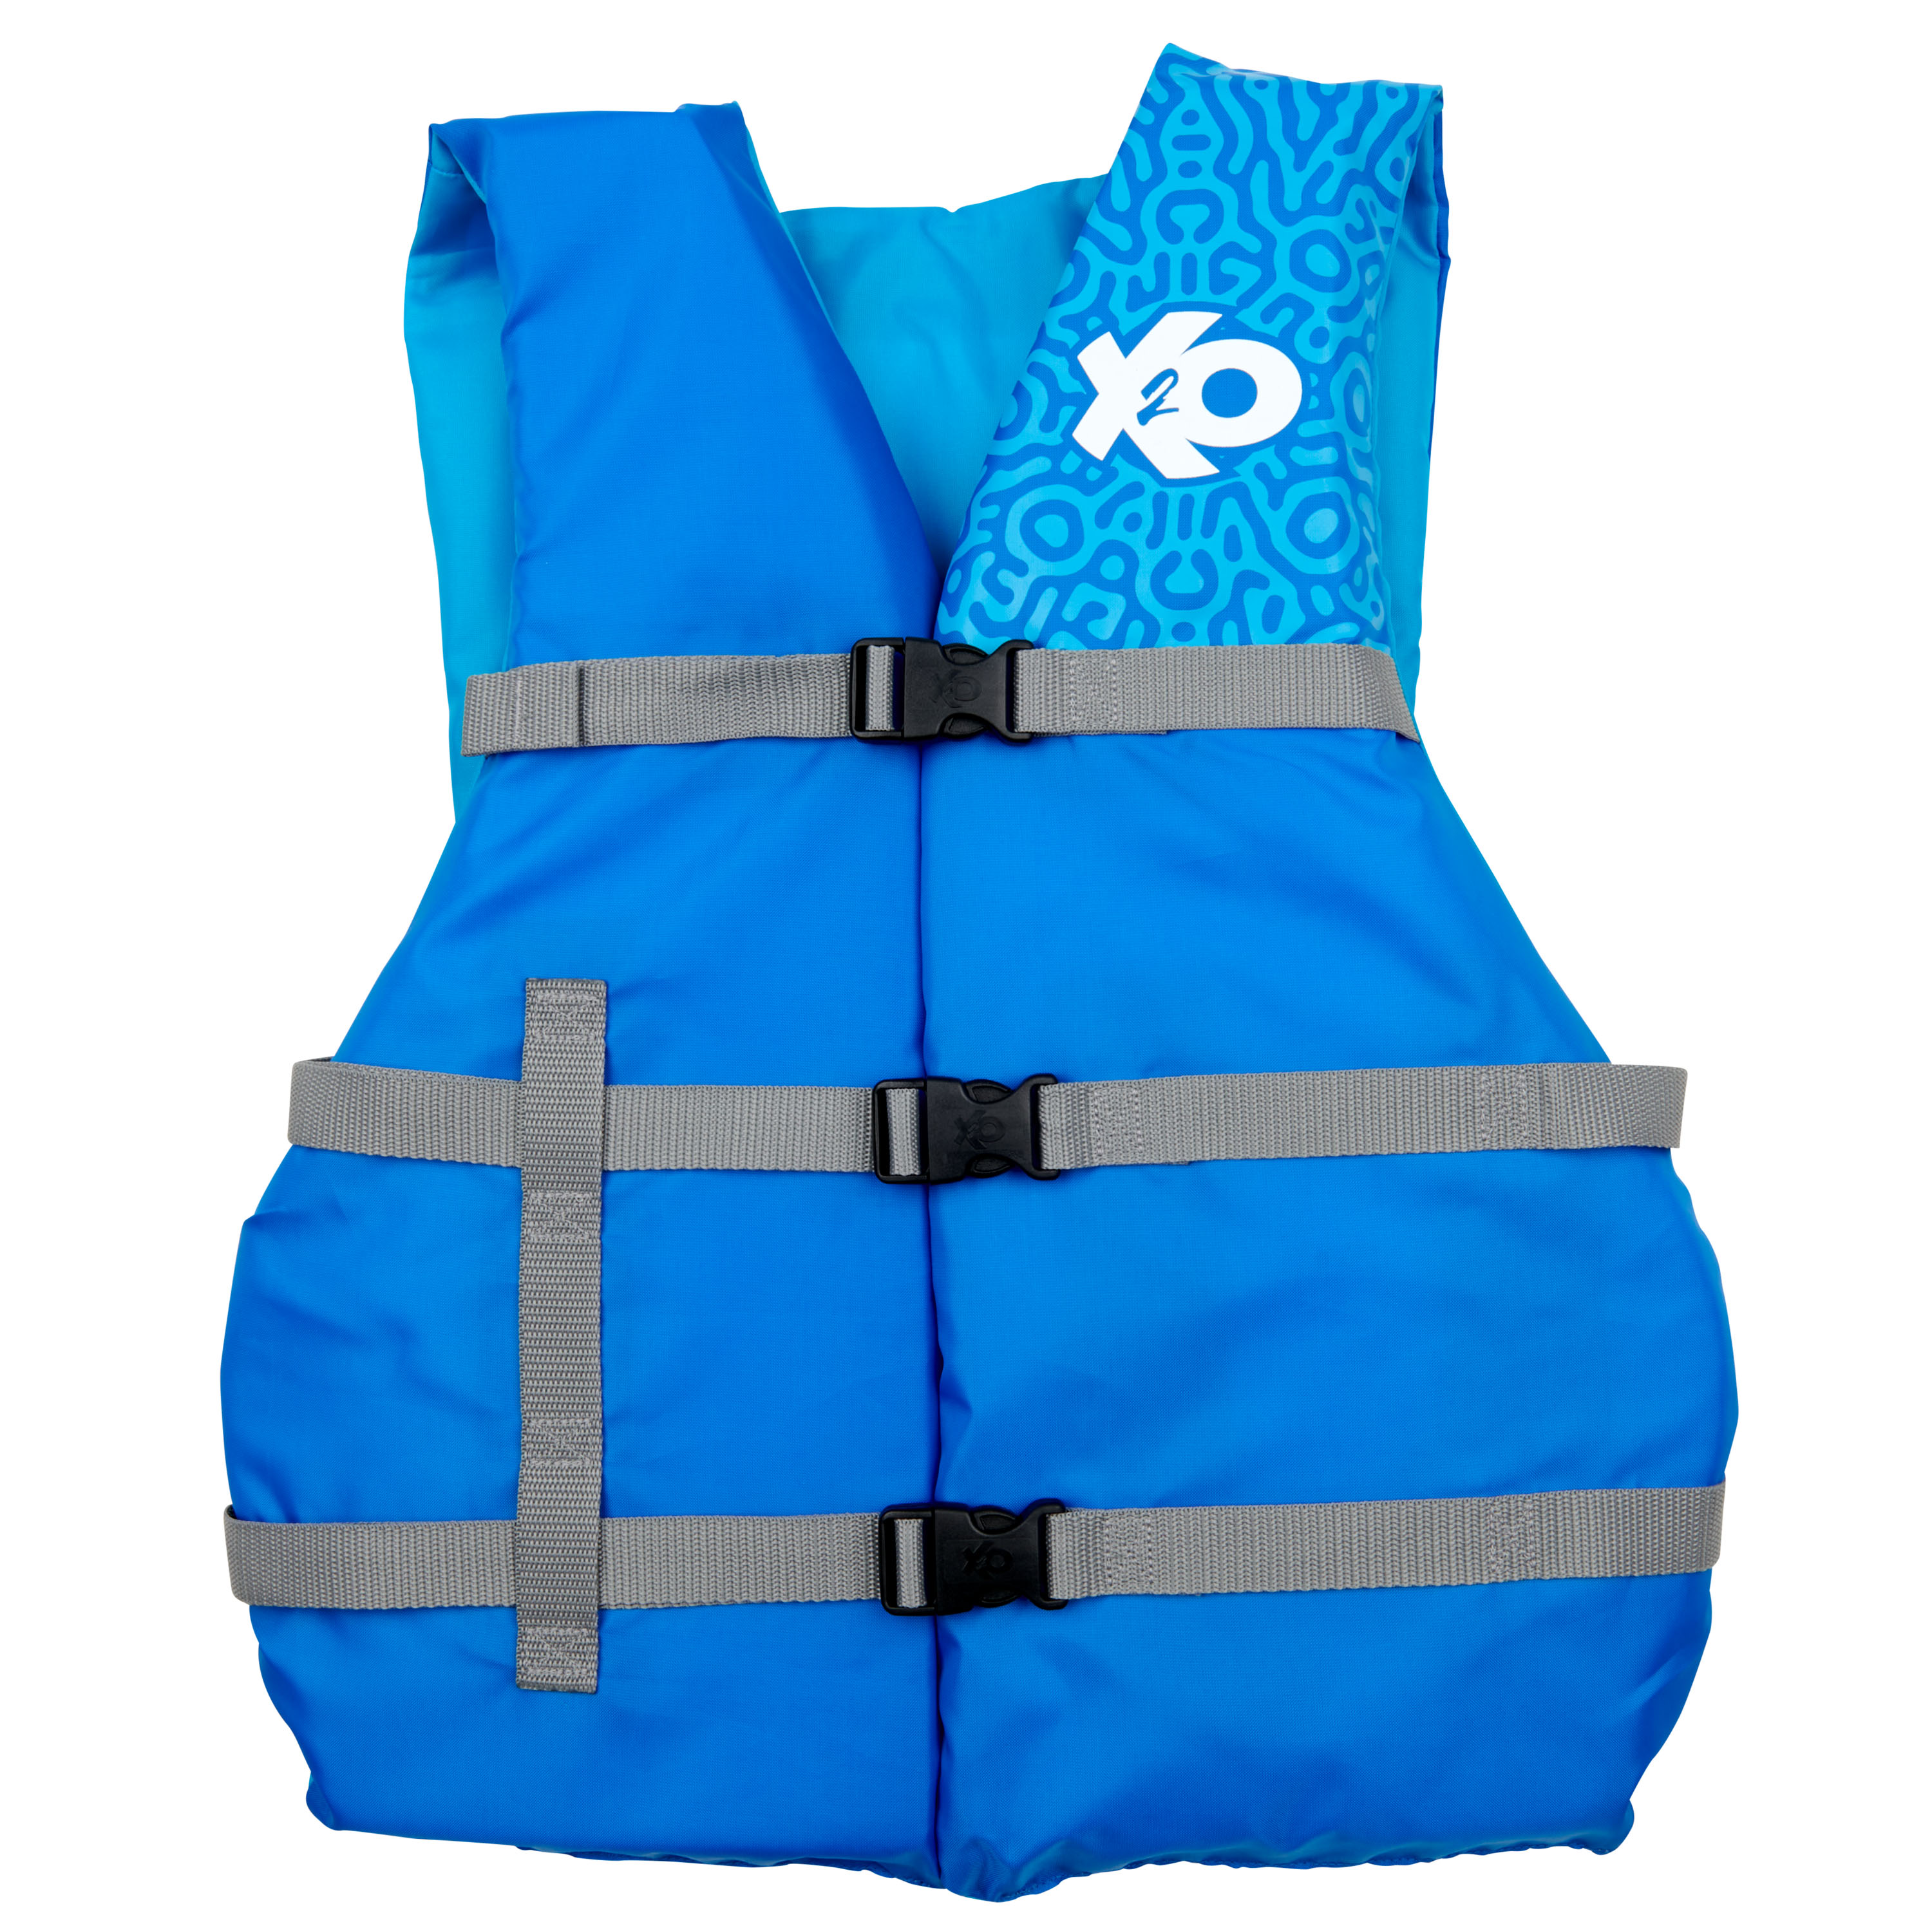 X2O Universal Adult 2X/3X Life Vest and Jacket, (50" - 60" Chest), Blue Ocean Coral - image 1 of 11